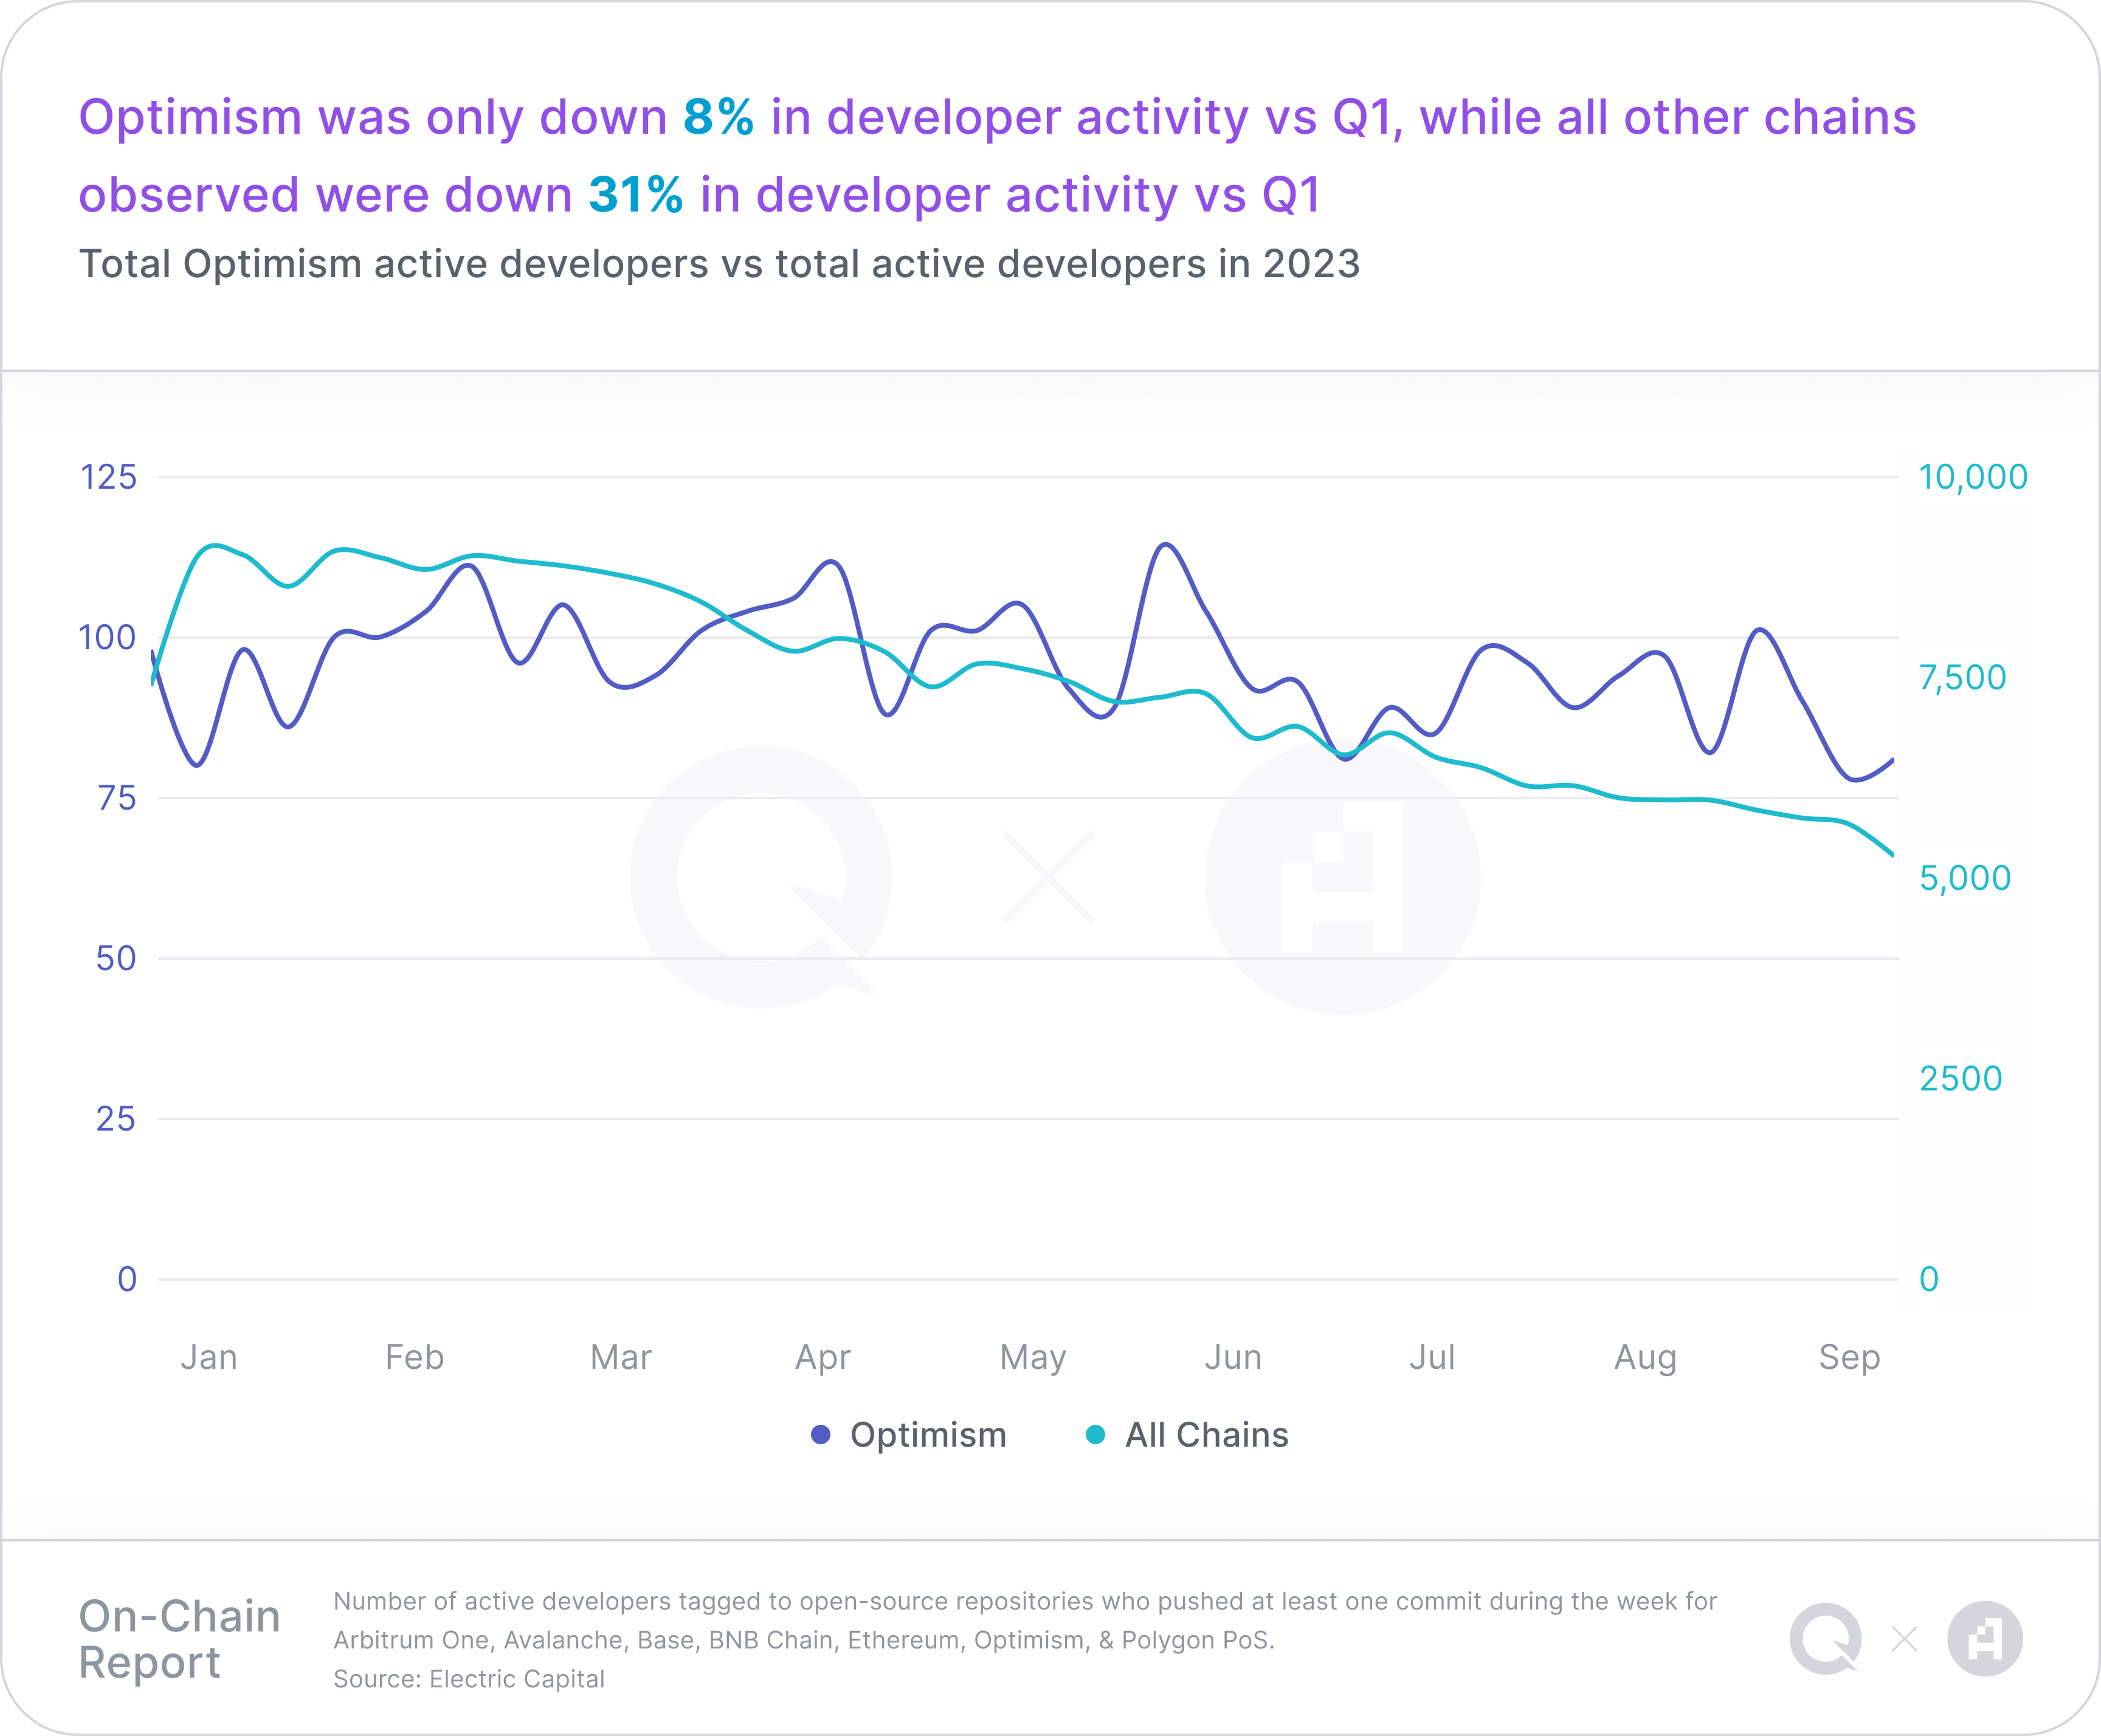 A chart representing Total Optimism active developers vs total active developers in 2023, with a takeaway headline of "Optimism was only down 8% in developer activity vs Q1, while all other chains observed were down 31% in developer activity vs Q1"